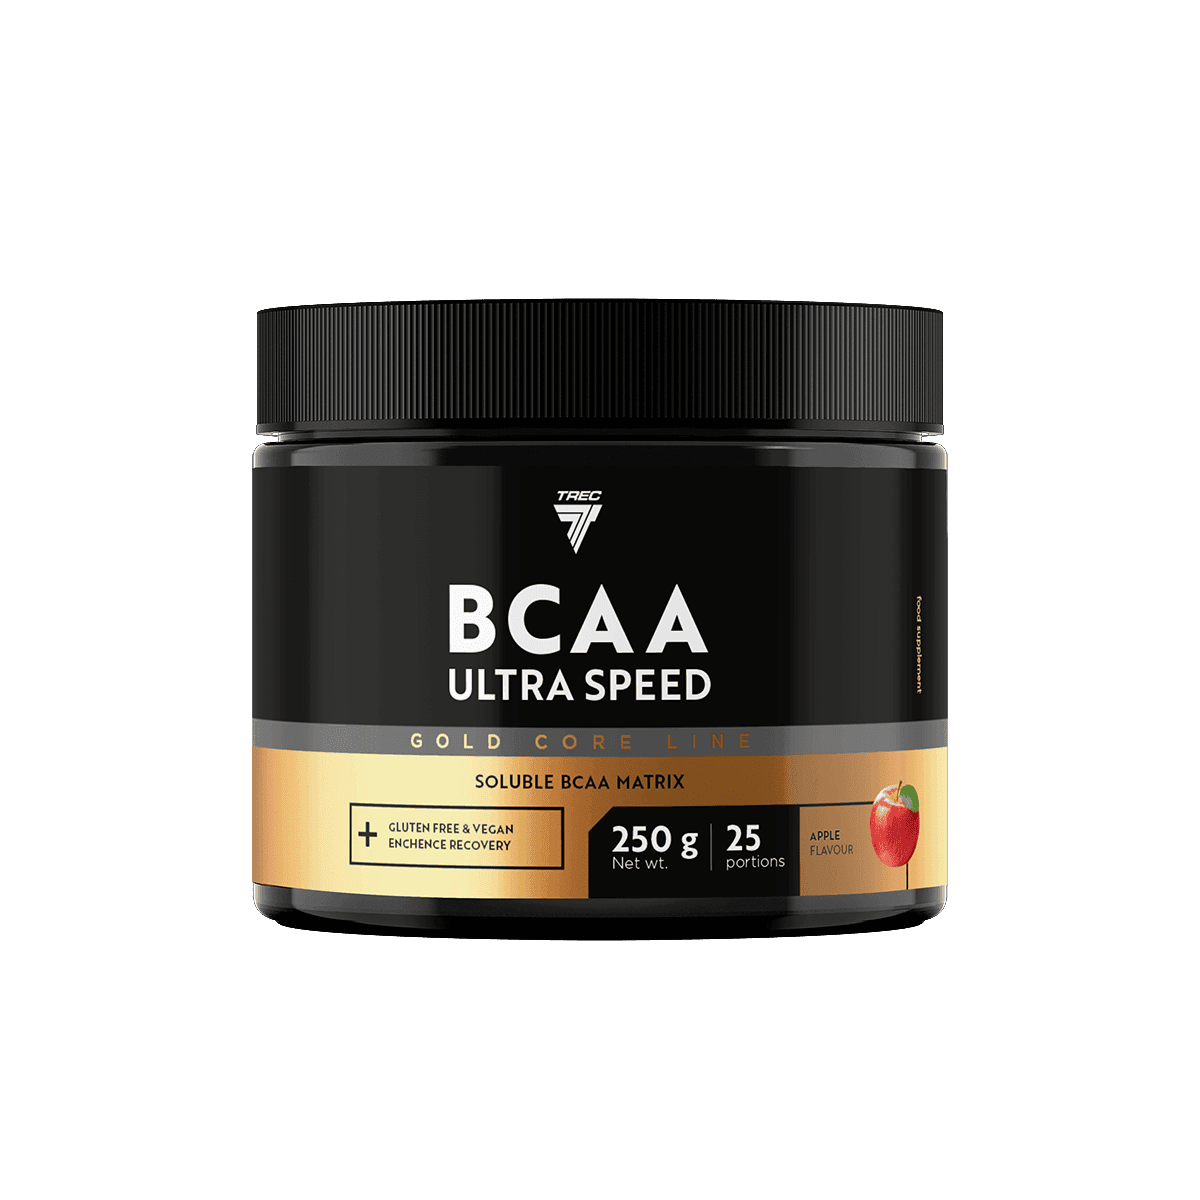 TREC NUTRITION BCAA GOLD CORE LINE ULTRA SPEED - 250г - Јаболко